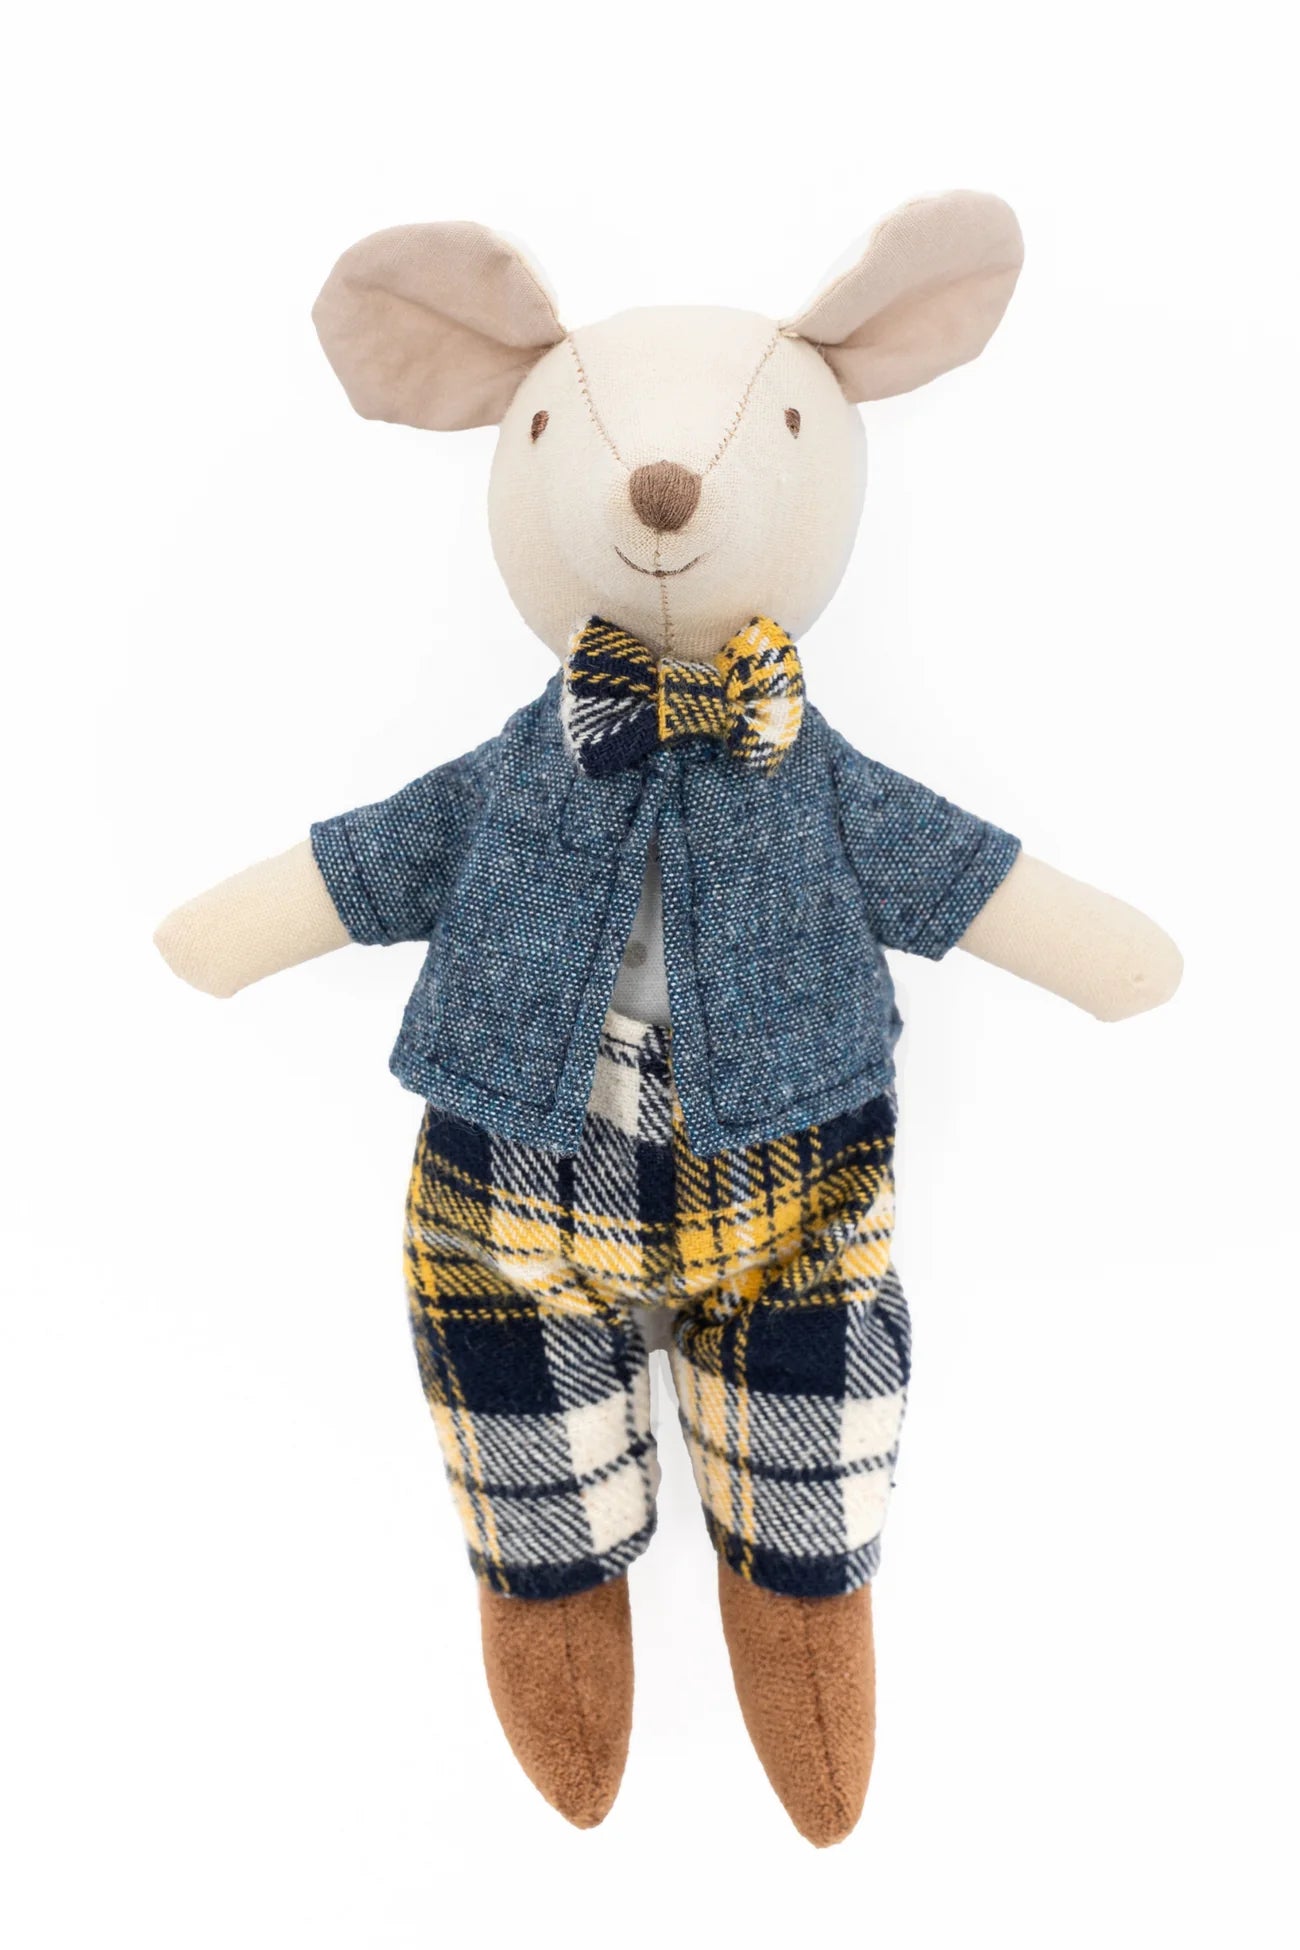 ARCHIE THE MOUSE MINI DOLL